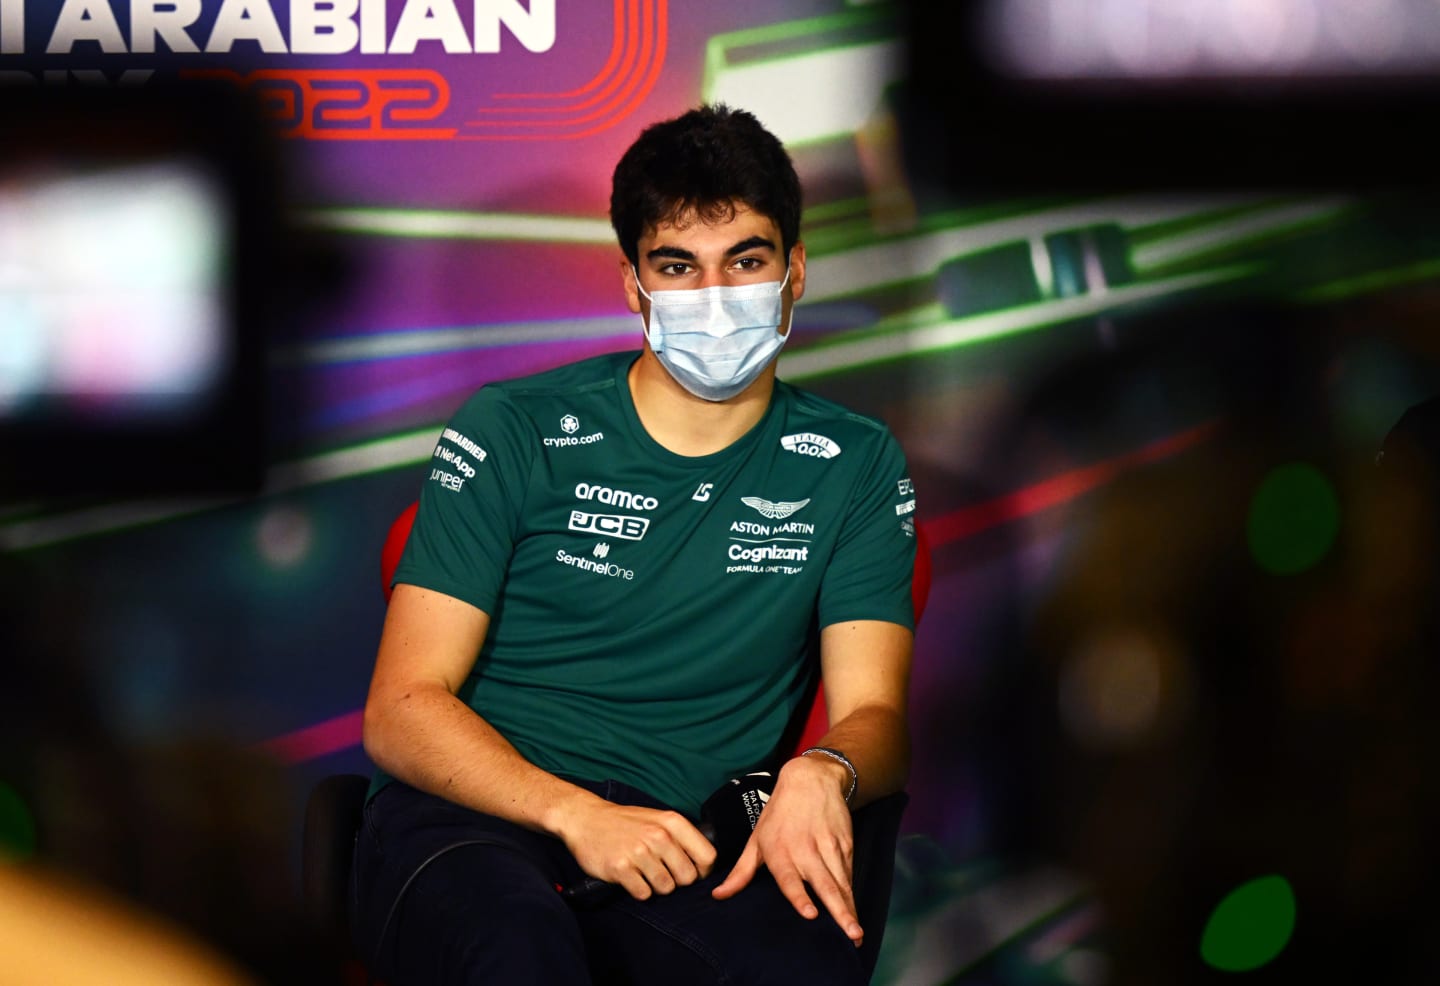 JEDDAH, SAUDI ARABIA - MARCH 25: Lance Stroll of Canada and Aston Martin F1 Team looks on in the Drivers Press Conference before practice ahead of the F1 Grand Prix of Saudi Arabia at the Jeddah Corniche Circuit on March 25, 2022 in Jeddah, Saudi Arabia. (Photo by Clive Mason/Getty Images)